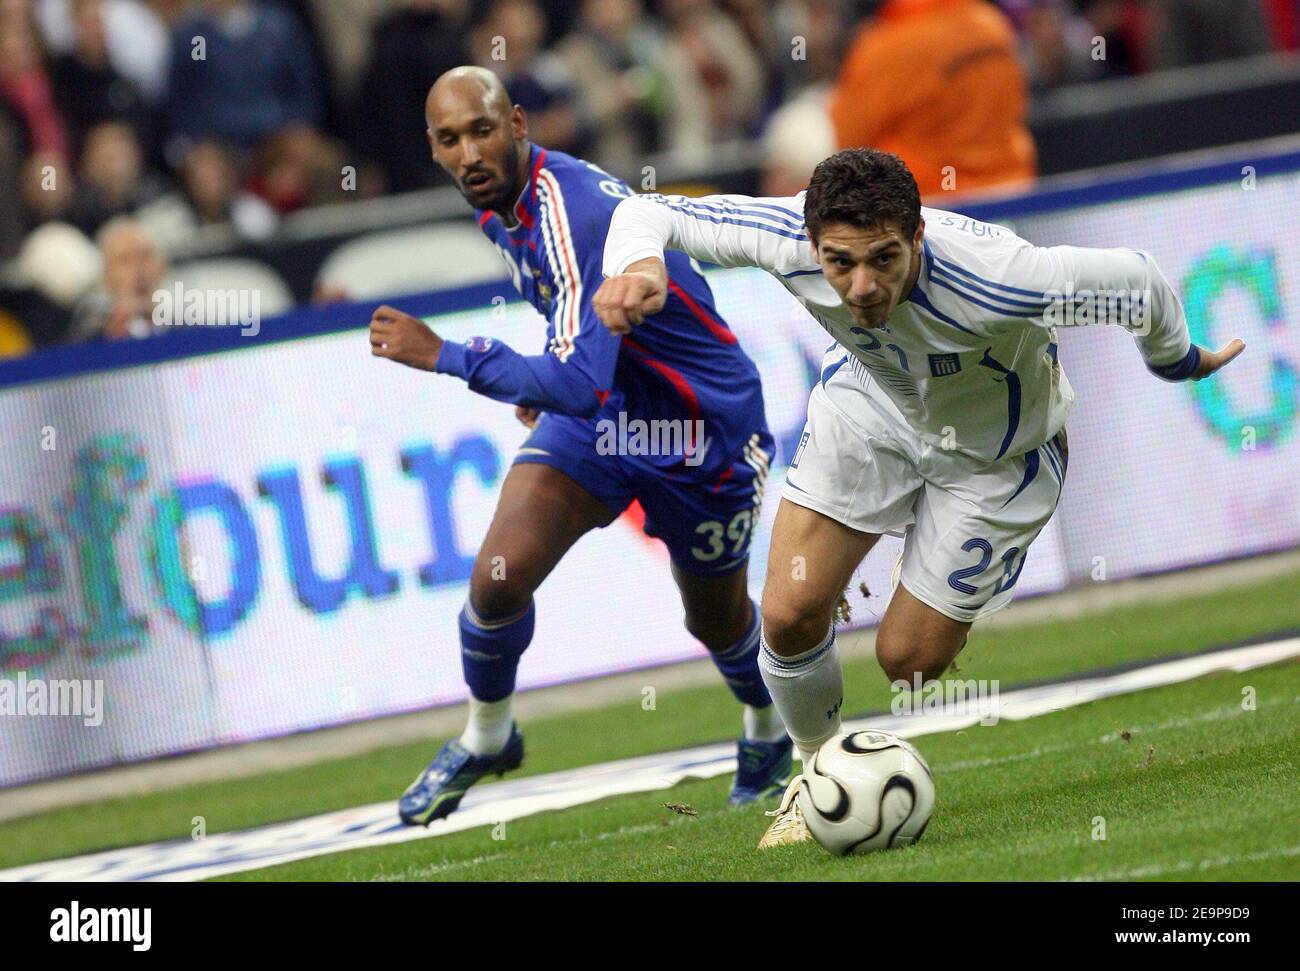 Nicolas Anelka and Greece's Konstantinos Katsouranis battle for the ball during International Friendly match, France vs Greece at the Stade de France, in Paris, France on November 15, 2006. France won 1-0. Photo by Gouhier-Taamallah/Cameleon/ABACAPRESS.COM Stock Photo